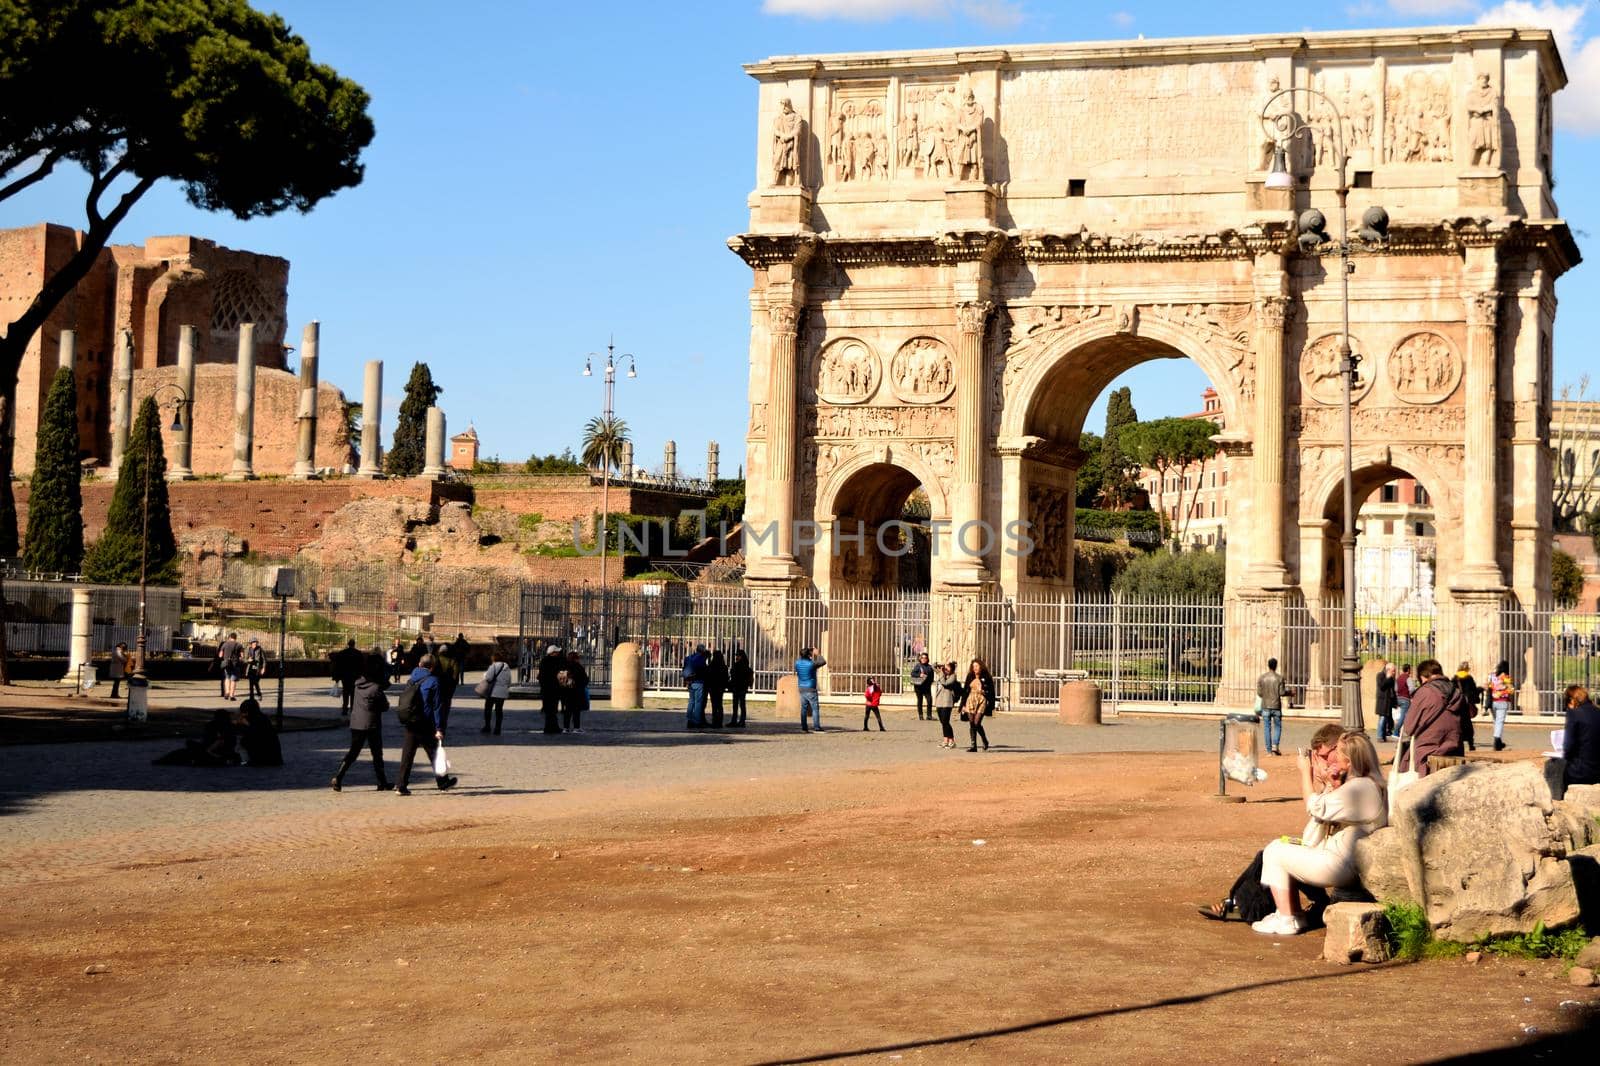 March 8th 2020, Rome, Italy: View of the Arch of Constantine with few tourists due to the coronavirus epidemic